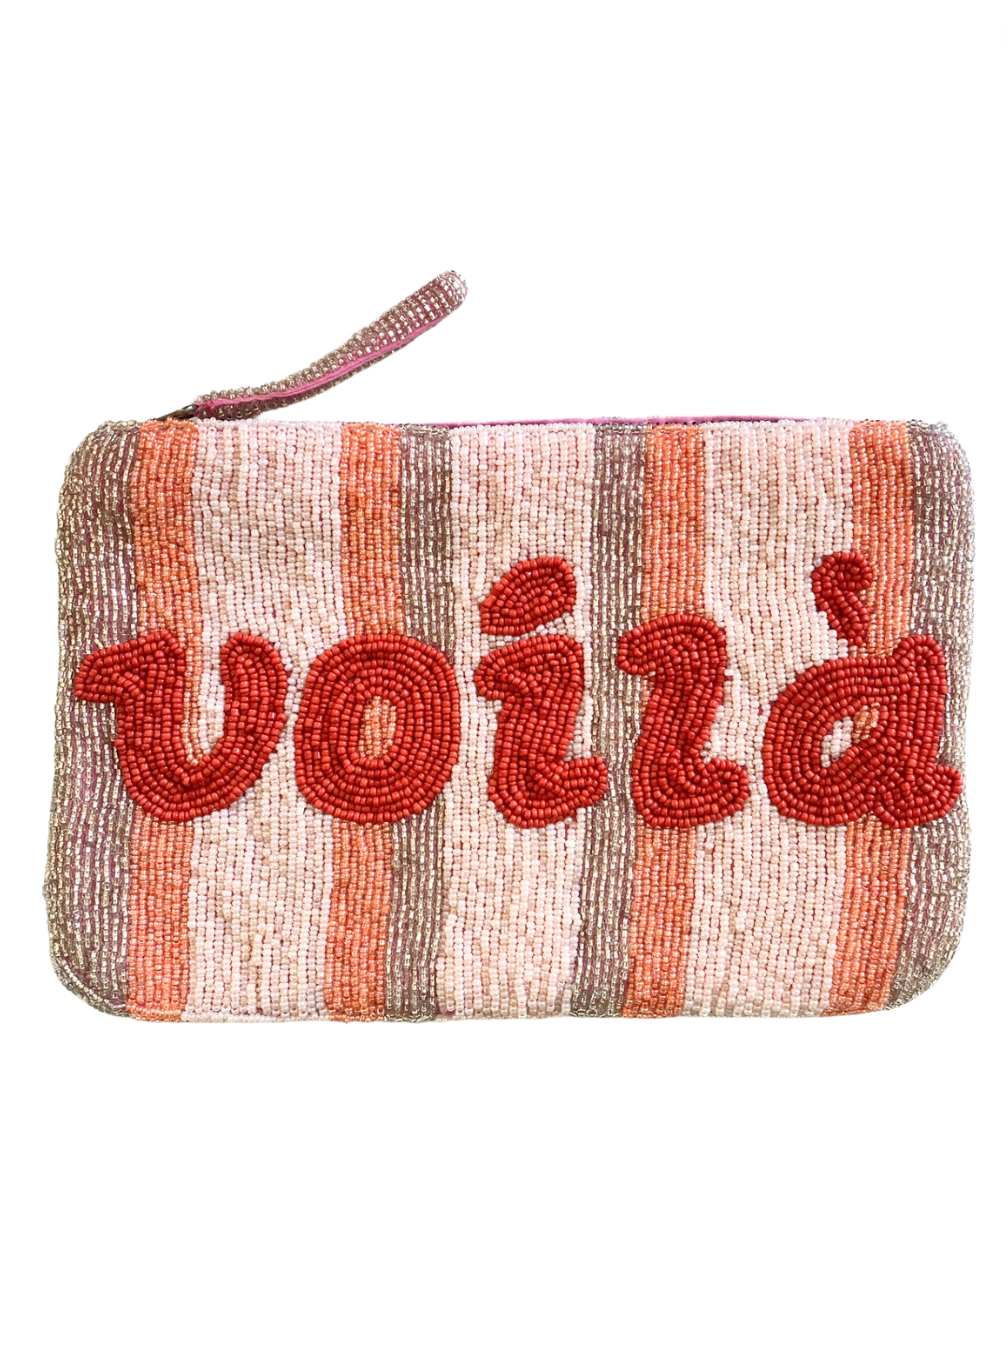 Voila bead clutch - Silver, peach, pink and red